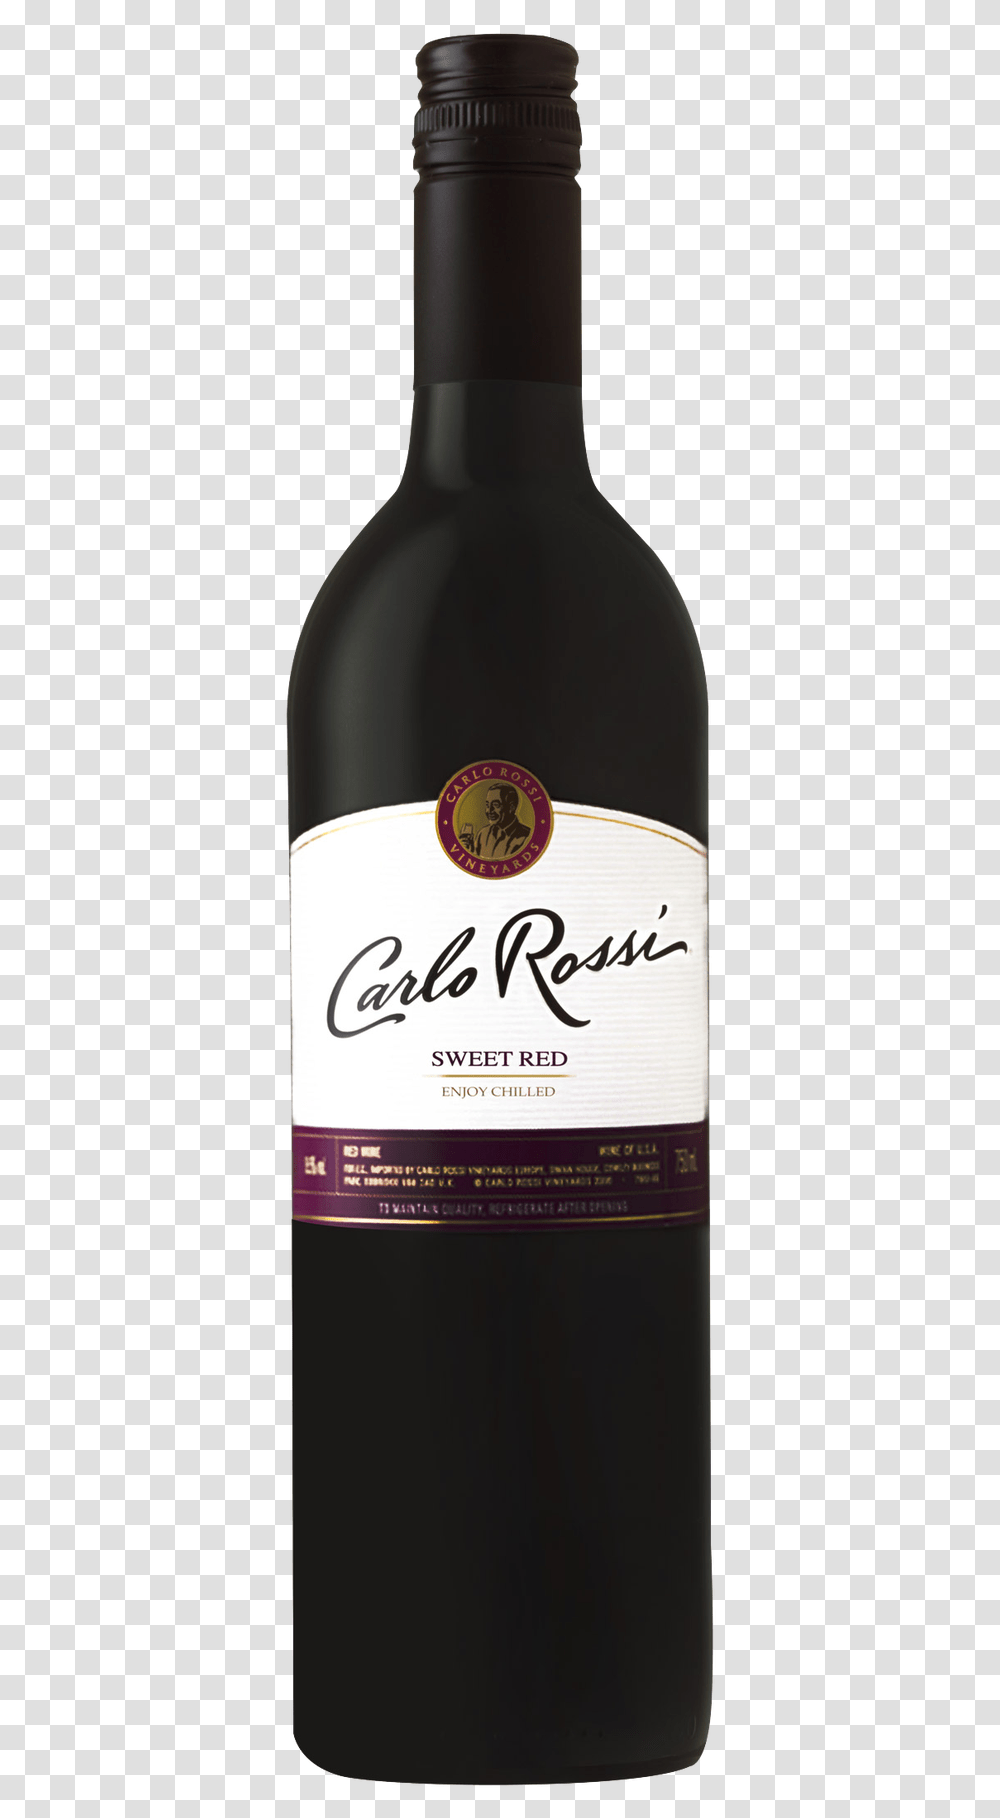 Carlo Rossi Sweet Red Wine, Alcohol, Beverage, Drink, Bottle Transparent Png